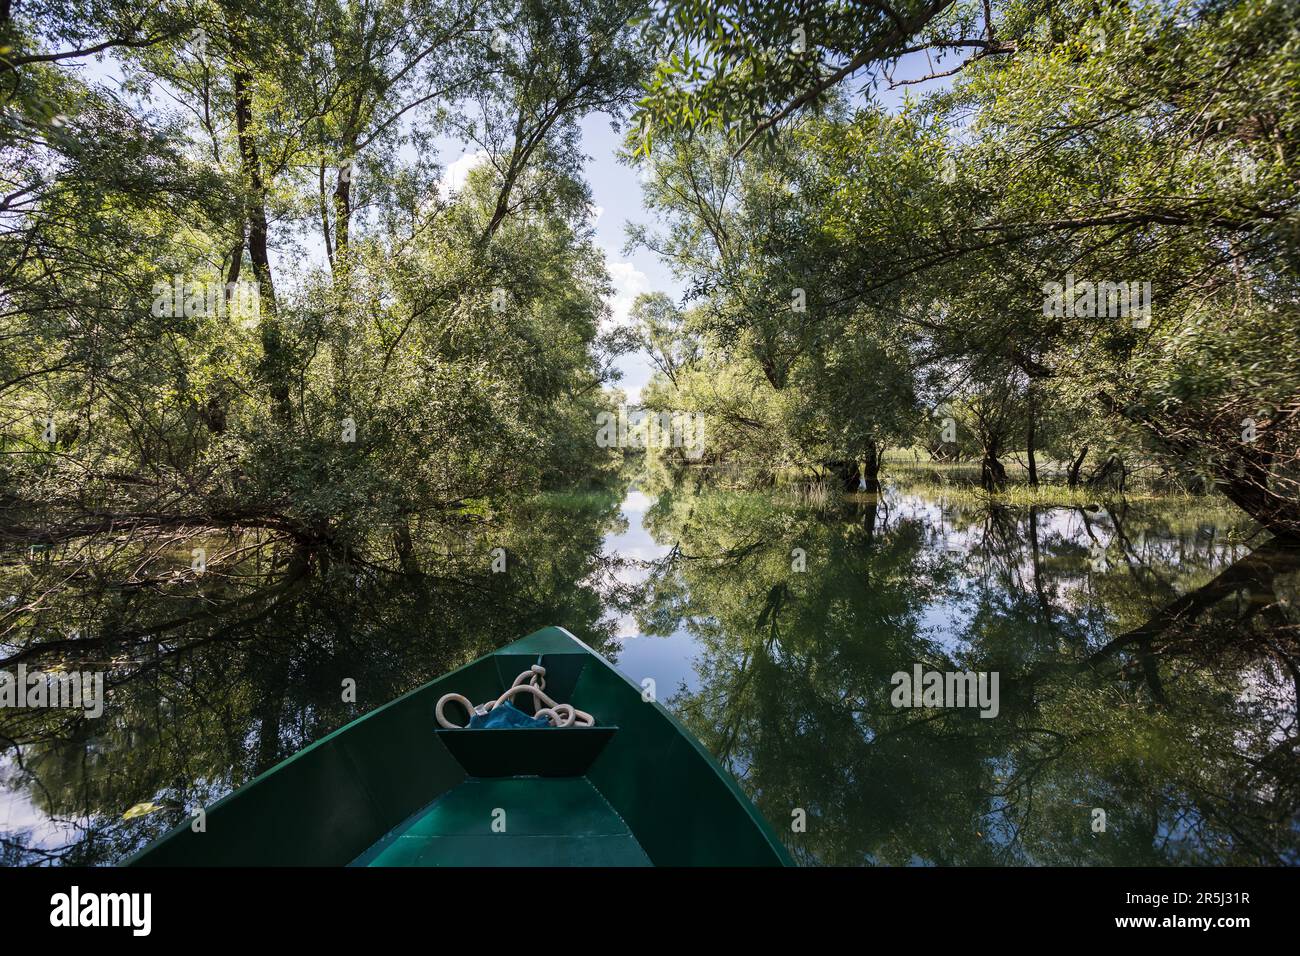 A secluded section off Lake Skadar in Montenegro surrounded in a rainforest like environment. Stock Photo